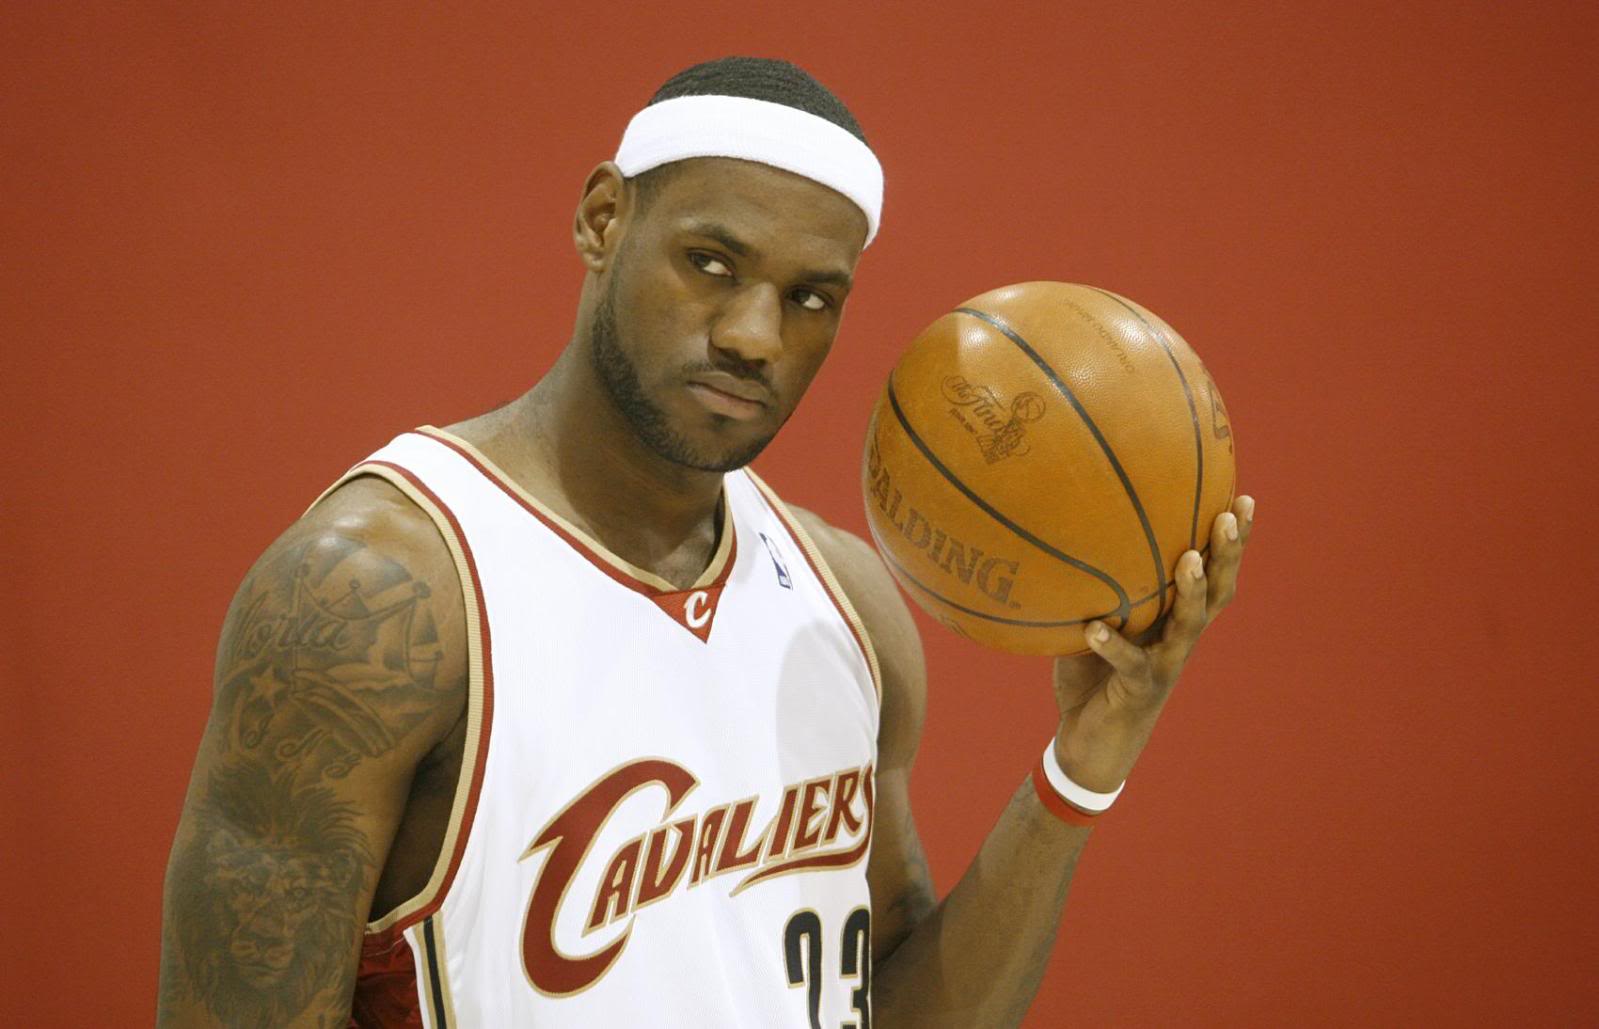 SPORTS: LeBron James Says Race Was A Factor In Cleveland Backlash